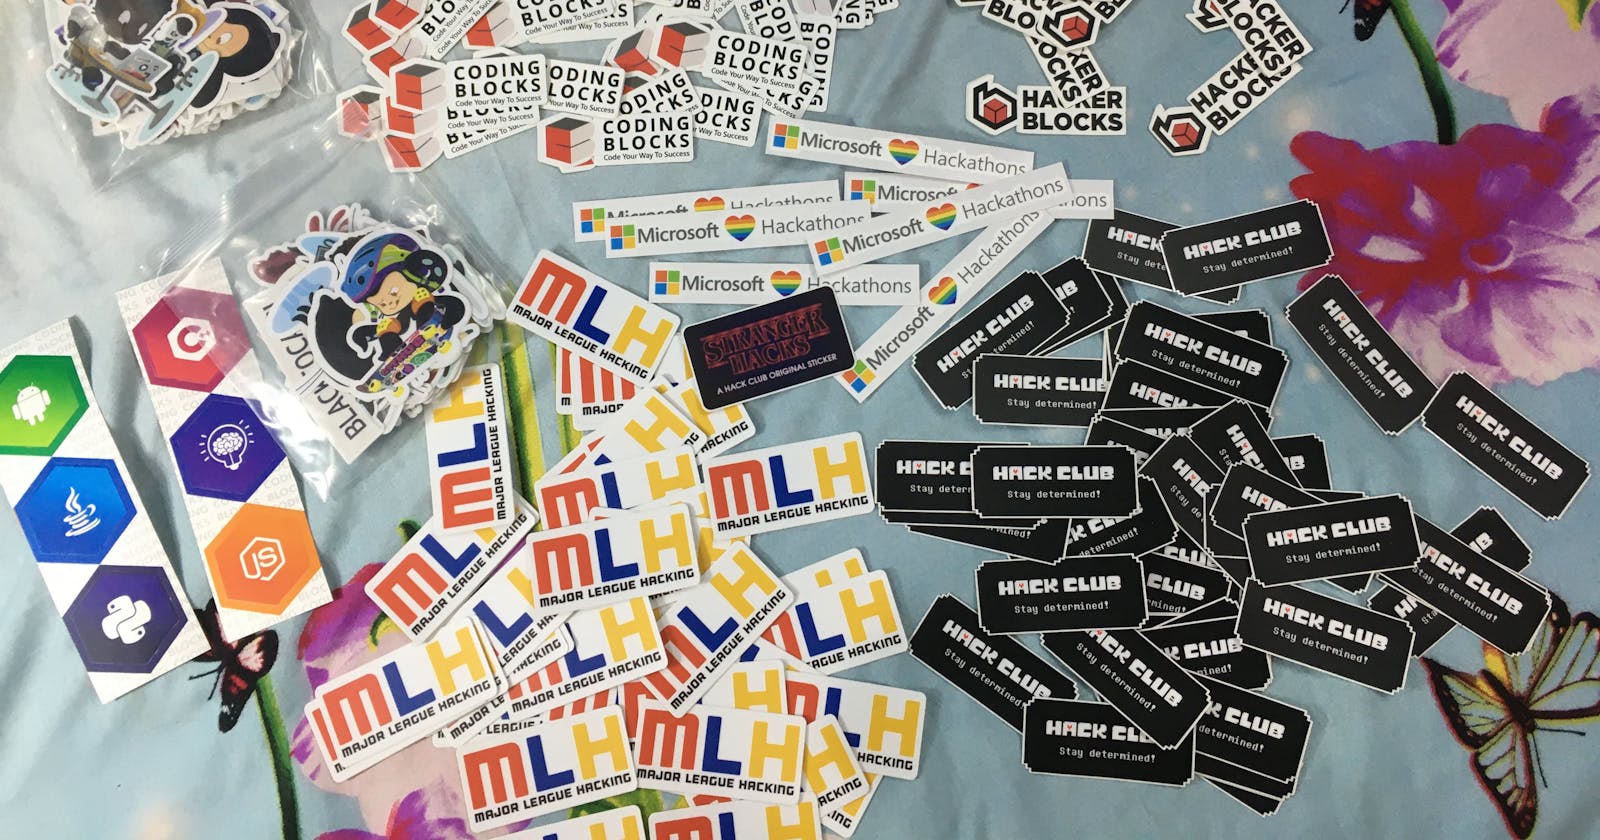 Free Swags For Developers